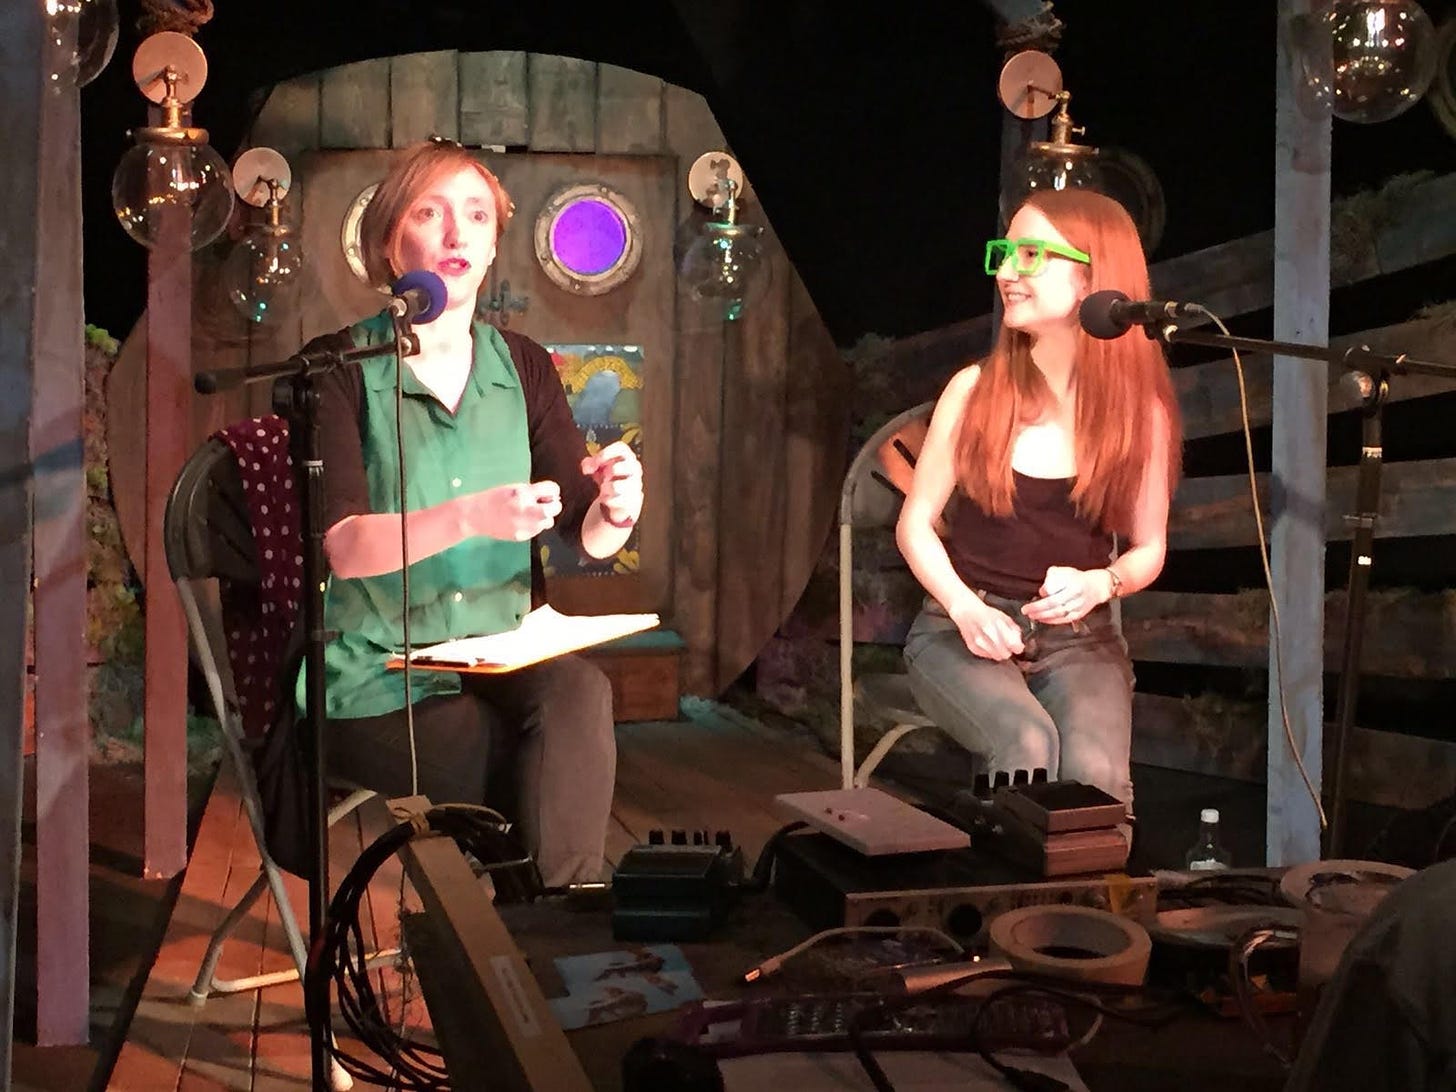 Two white women (one with short fair hair and one with long ginger hair)sit on chairs with microphones with an elaborate stage set behind them. 